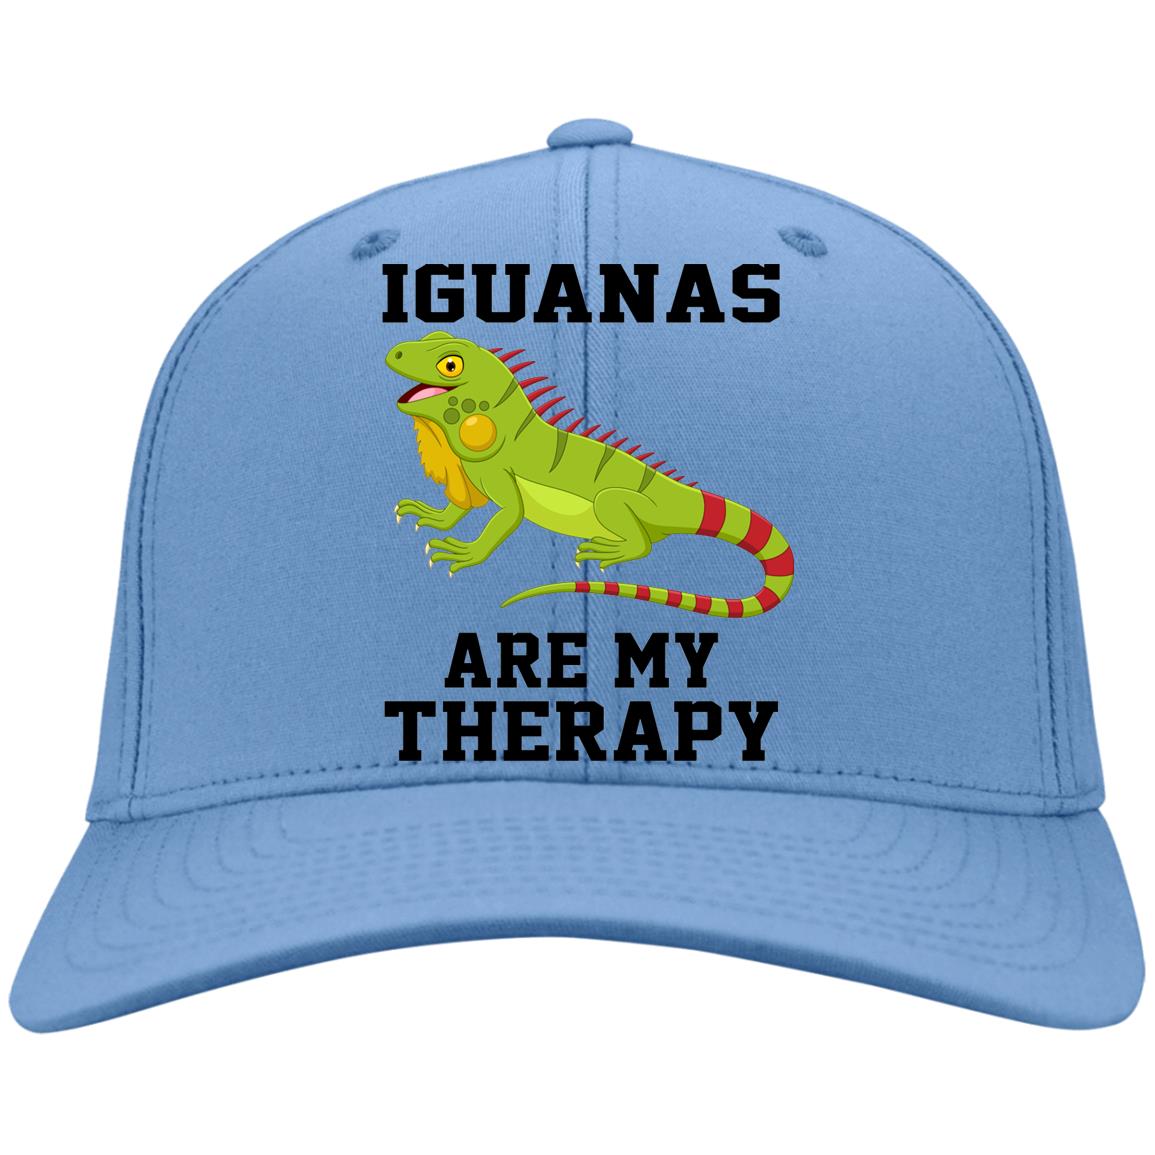 Iguanas Are My Therapy - Twill Cap